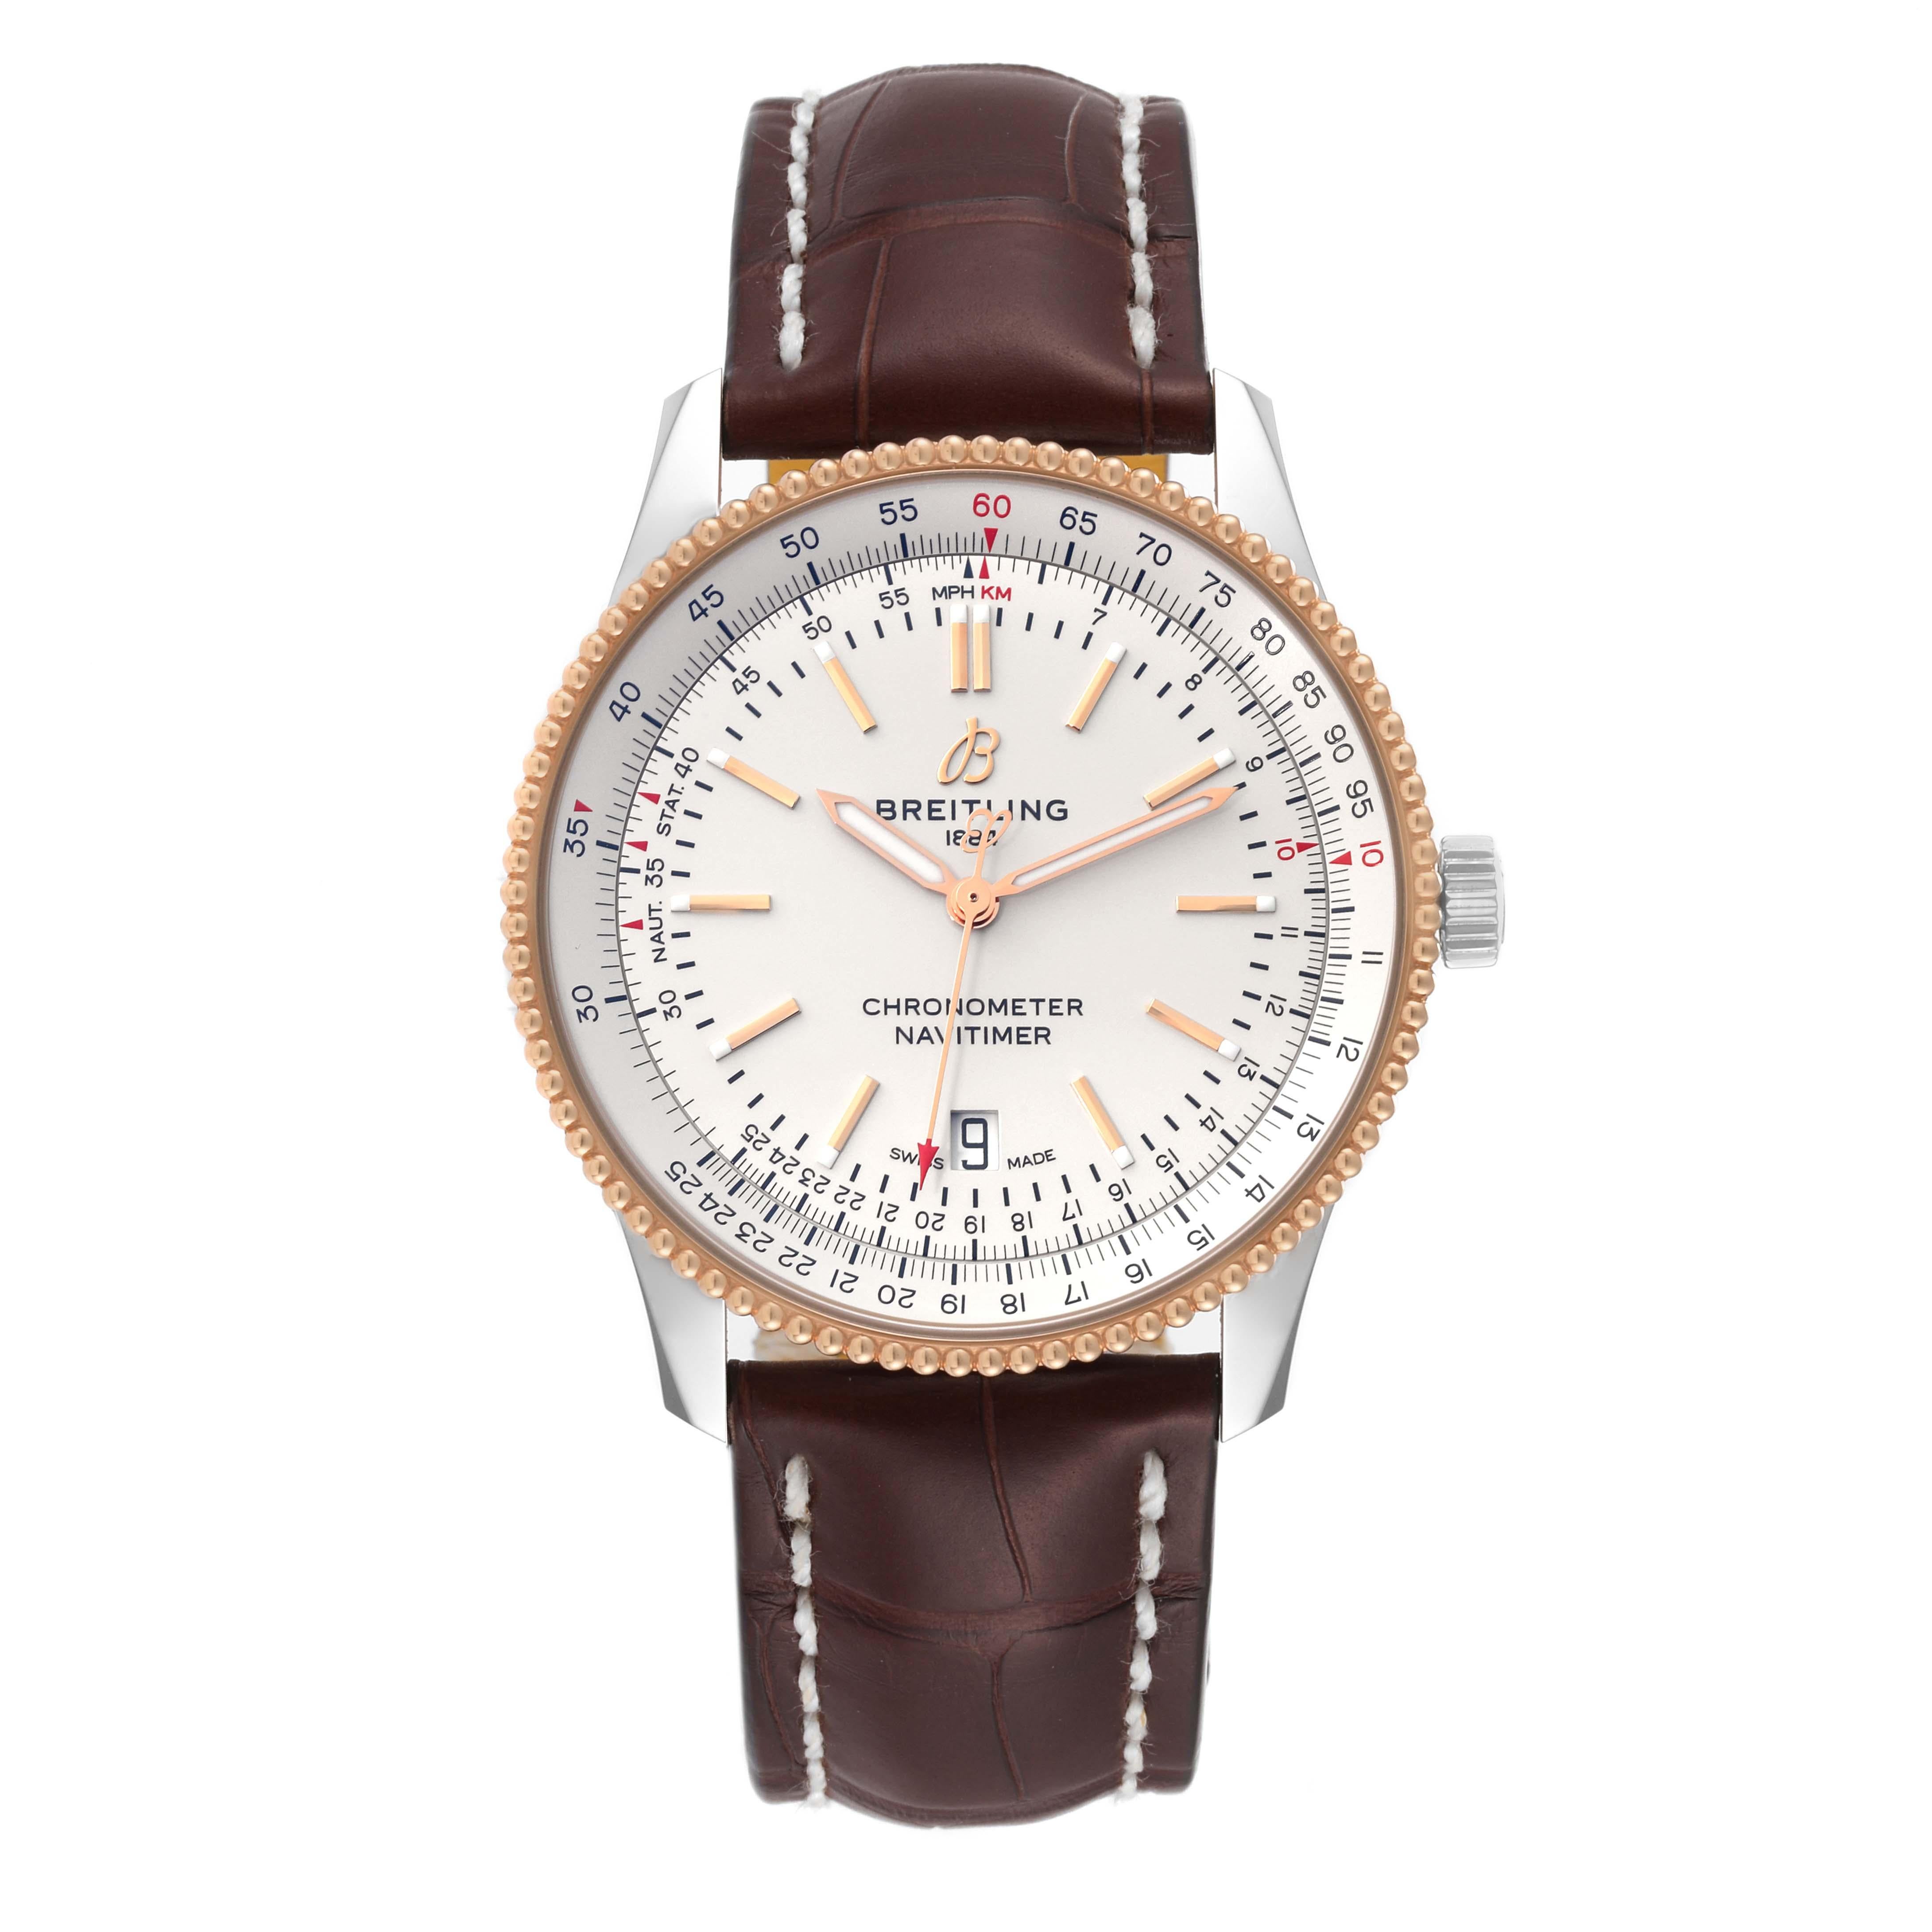 Breitling Navitimer 1 41mm Steel Rose Gold Mens Watch U17326 Box Card. Self-winding automatic officially certified chronometer movement. Stainless steel case 41 mm in diameter. 18k rose gold bidirectional revolving slide-rule bezel. Scratch